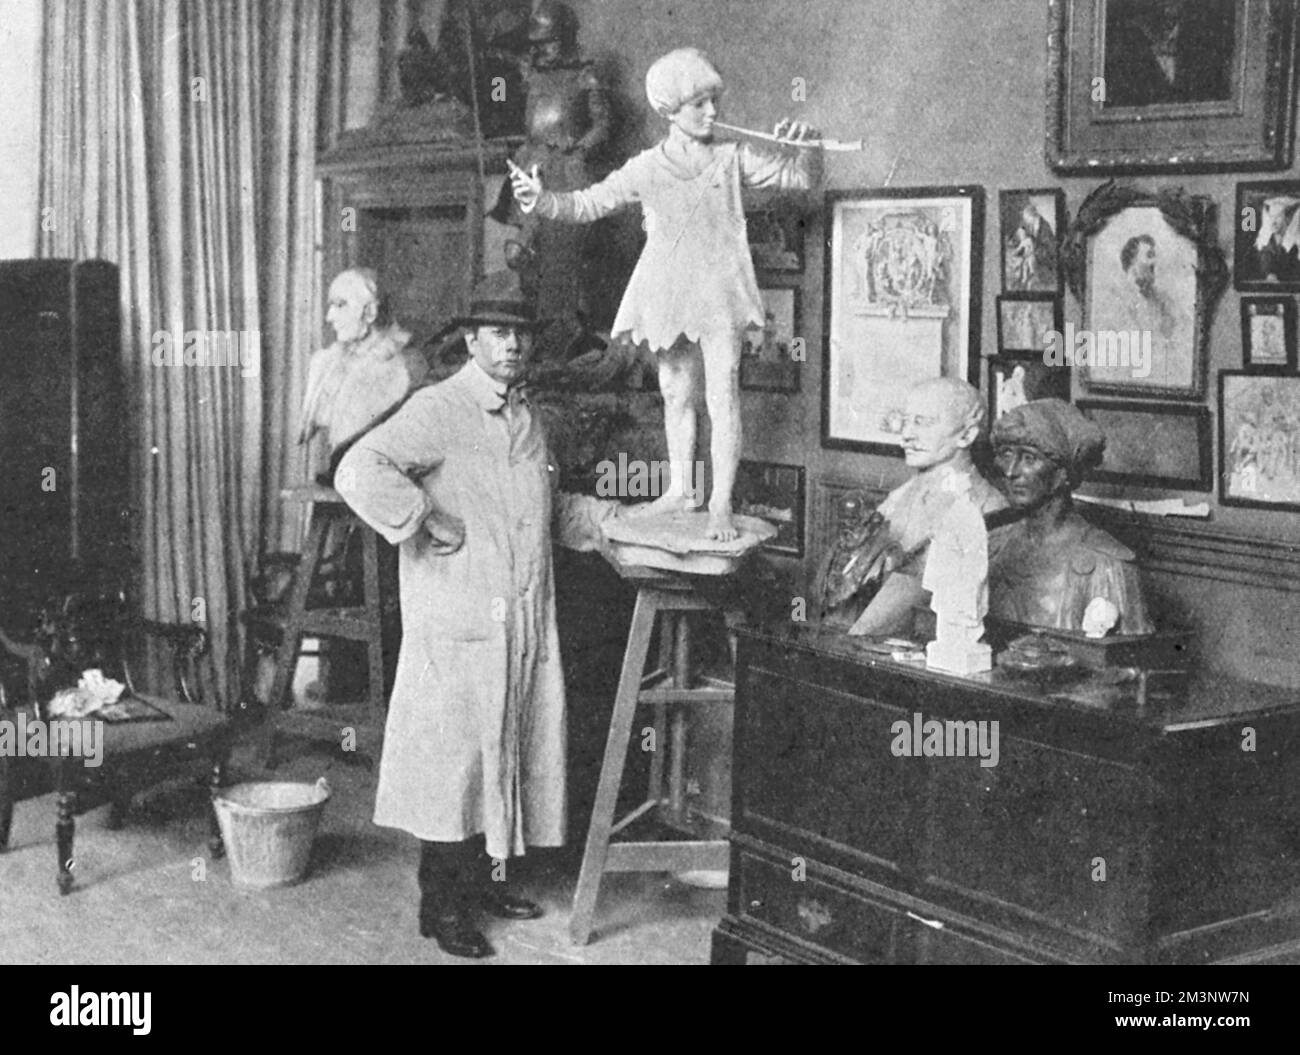 Sir George Frampton pictured in his studio with a sculpture of Peter Pan, the famous fictional creation of J. M. Barrie.  The sculpture was erected in Kensington Gardens on 1 May 1912.  There was no formal unveiling and the statue simply appeared, as if by magic, one morning.     Date: 1912 Stock Photo